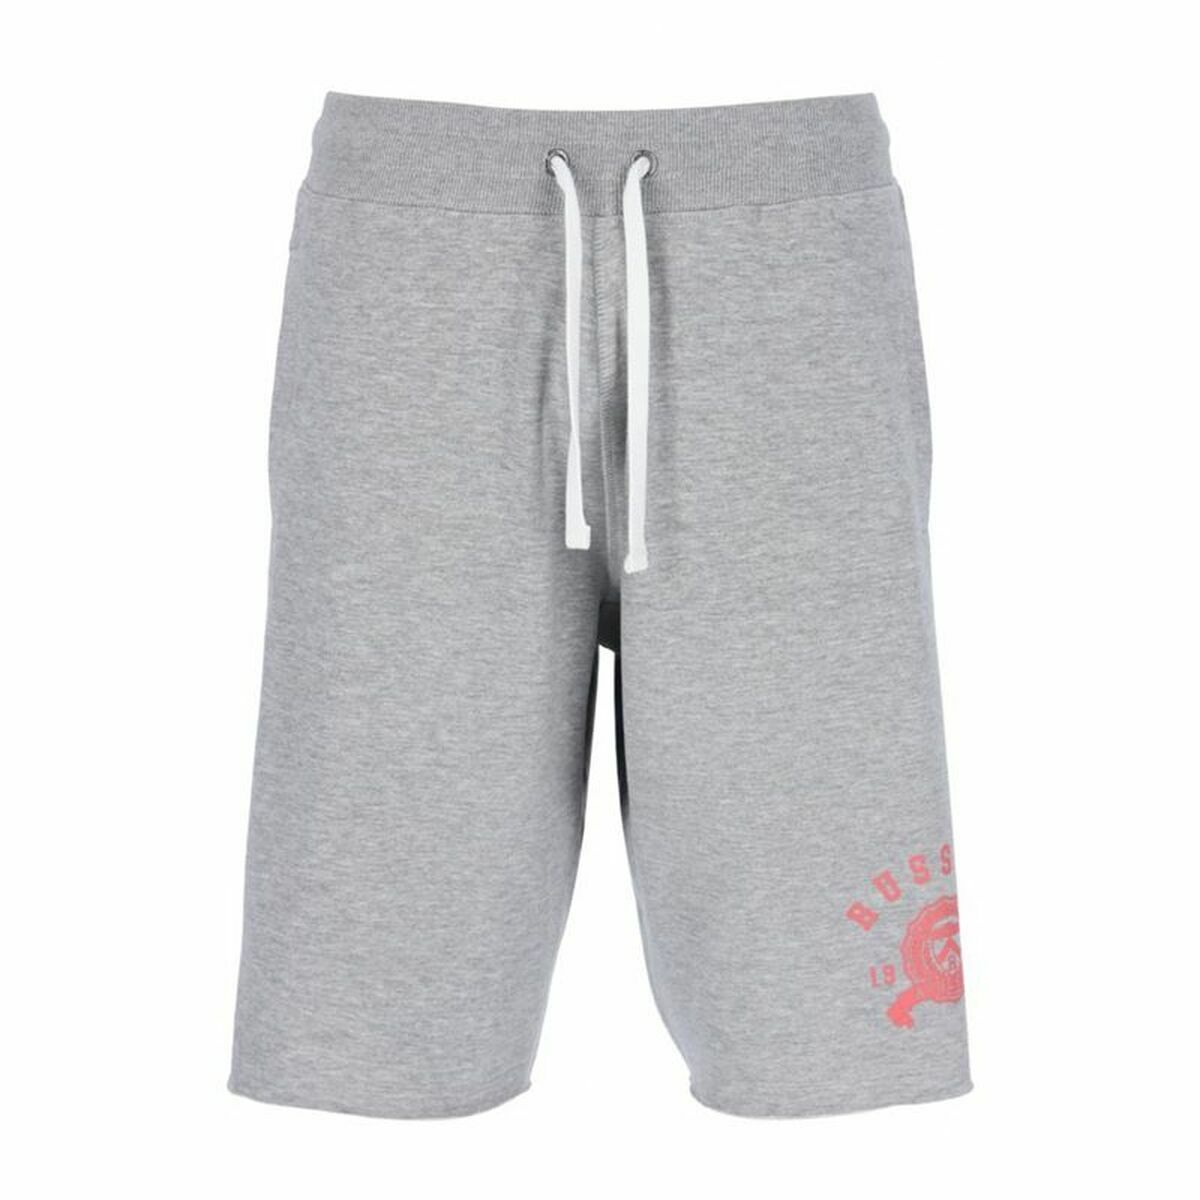 Pantaloncino Sportivo Russell Athletic Amr A30601 Grigio